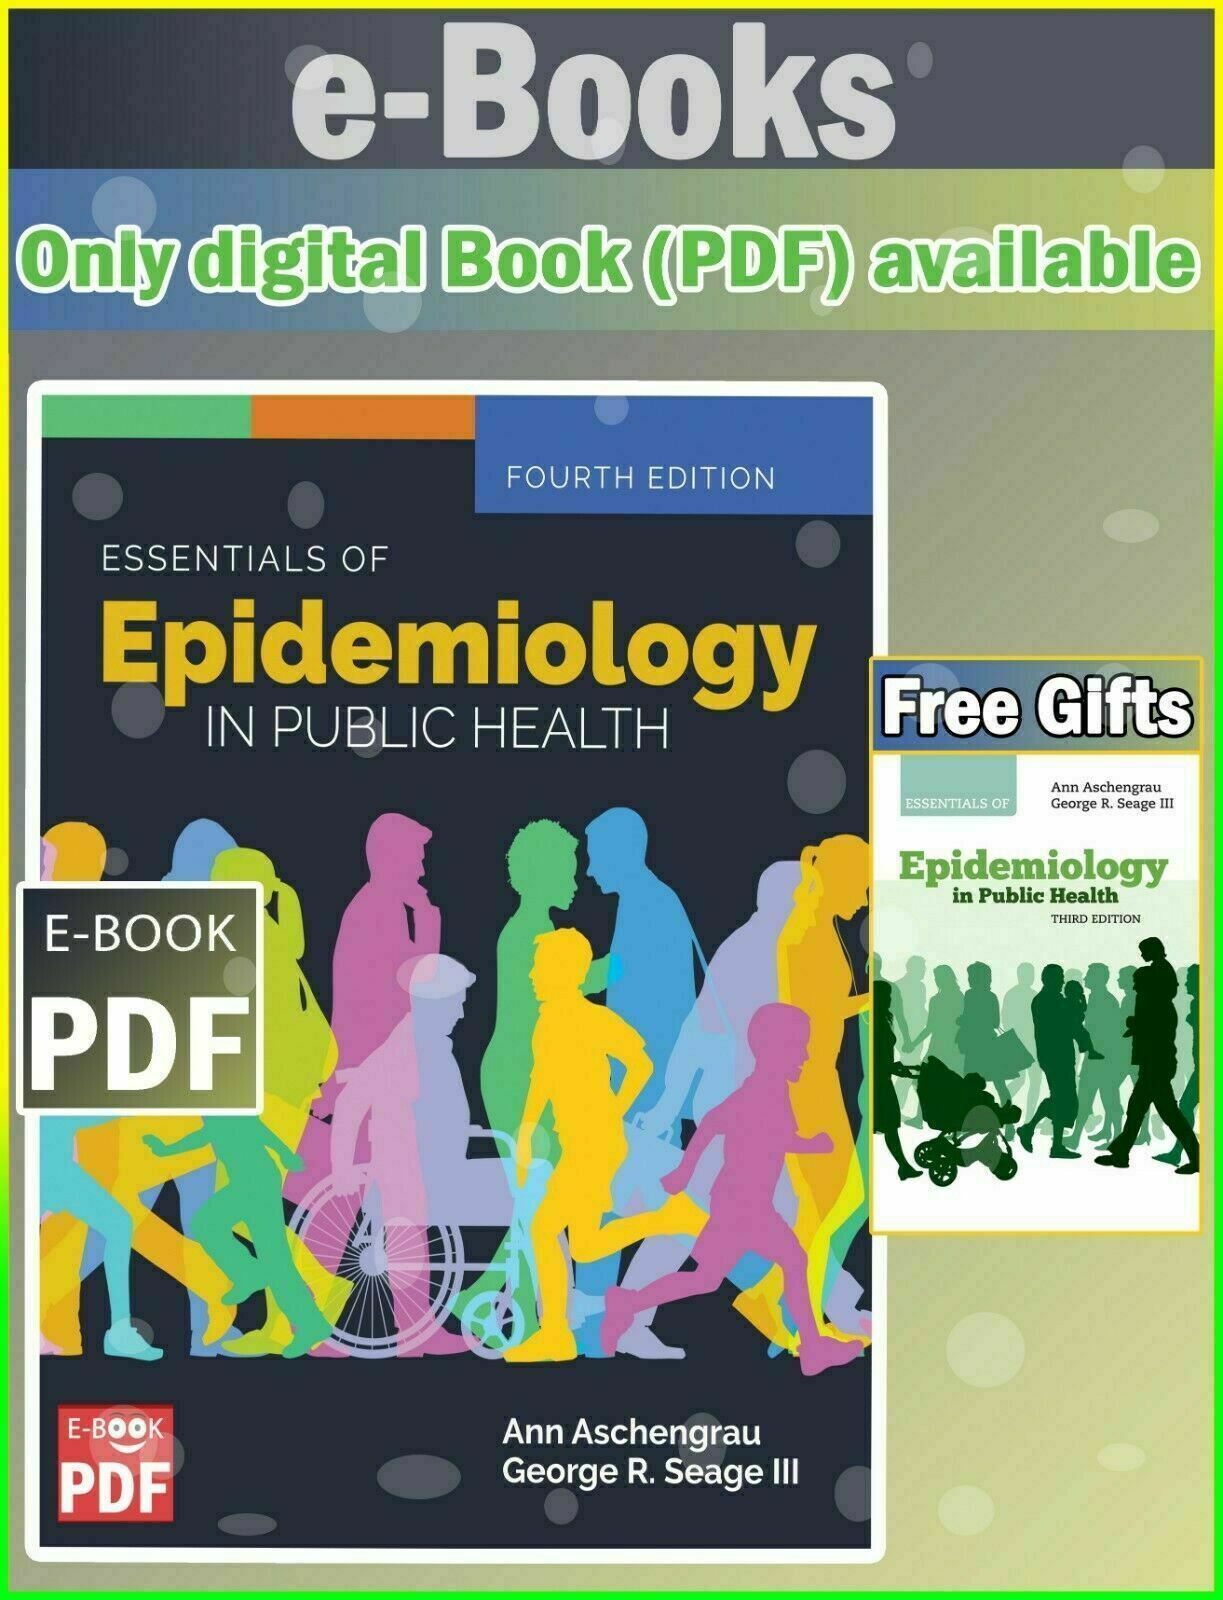 epidemiology and public health essay